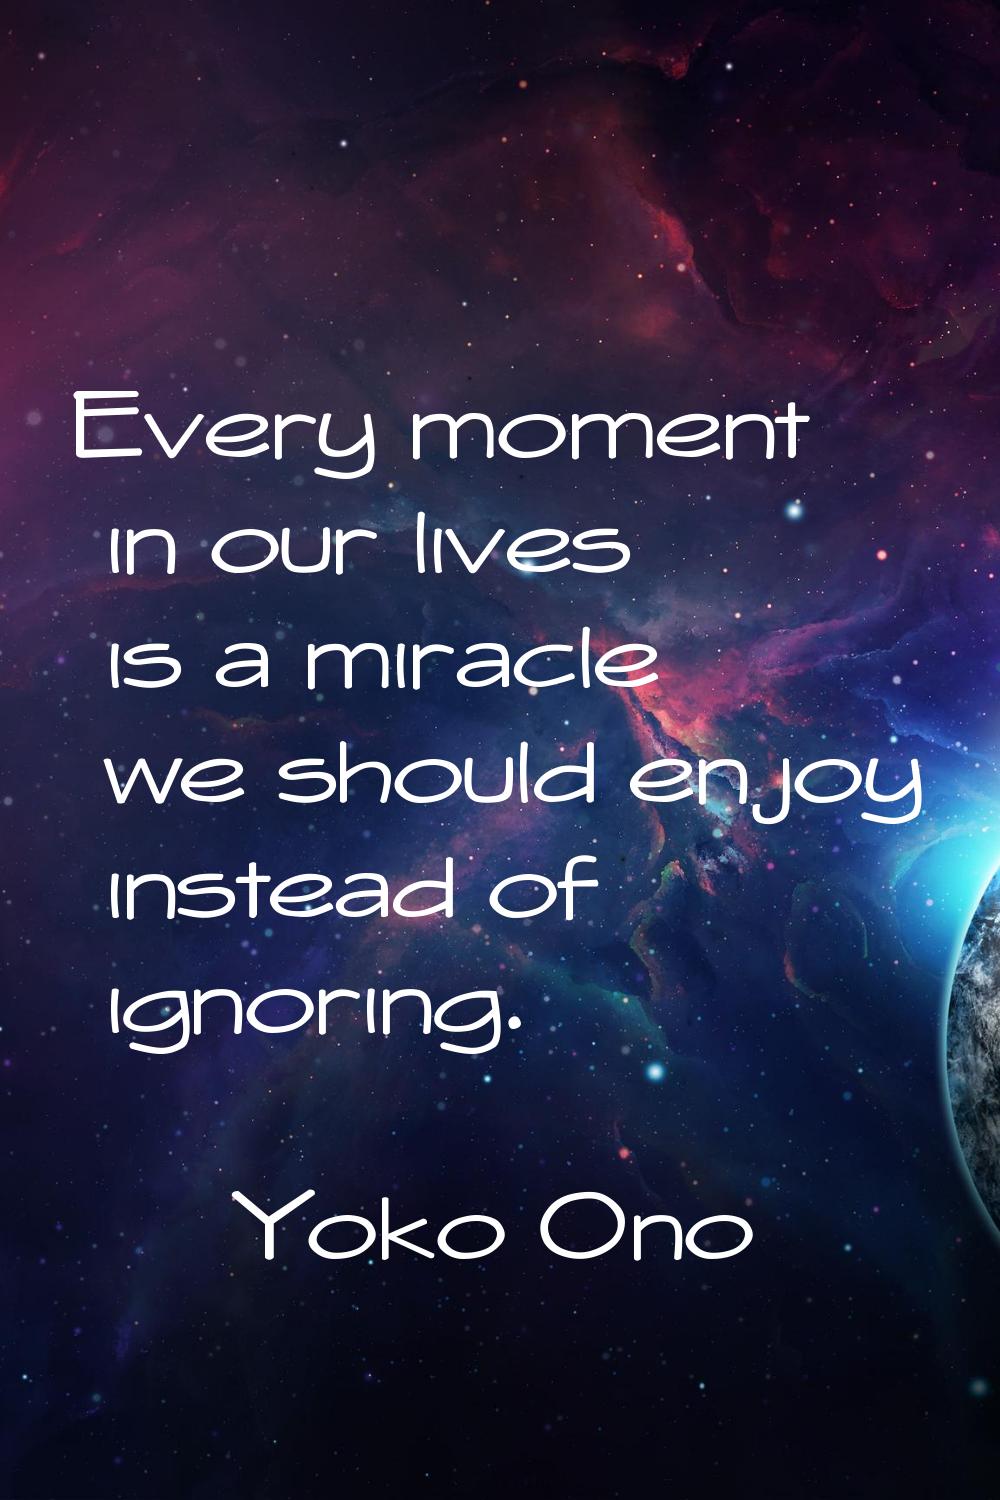 Every moment in our lives is a miracle we should enjoy instead of ignoring.